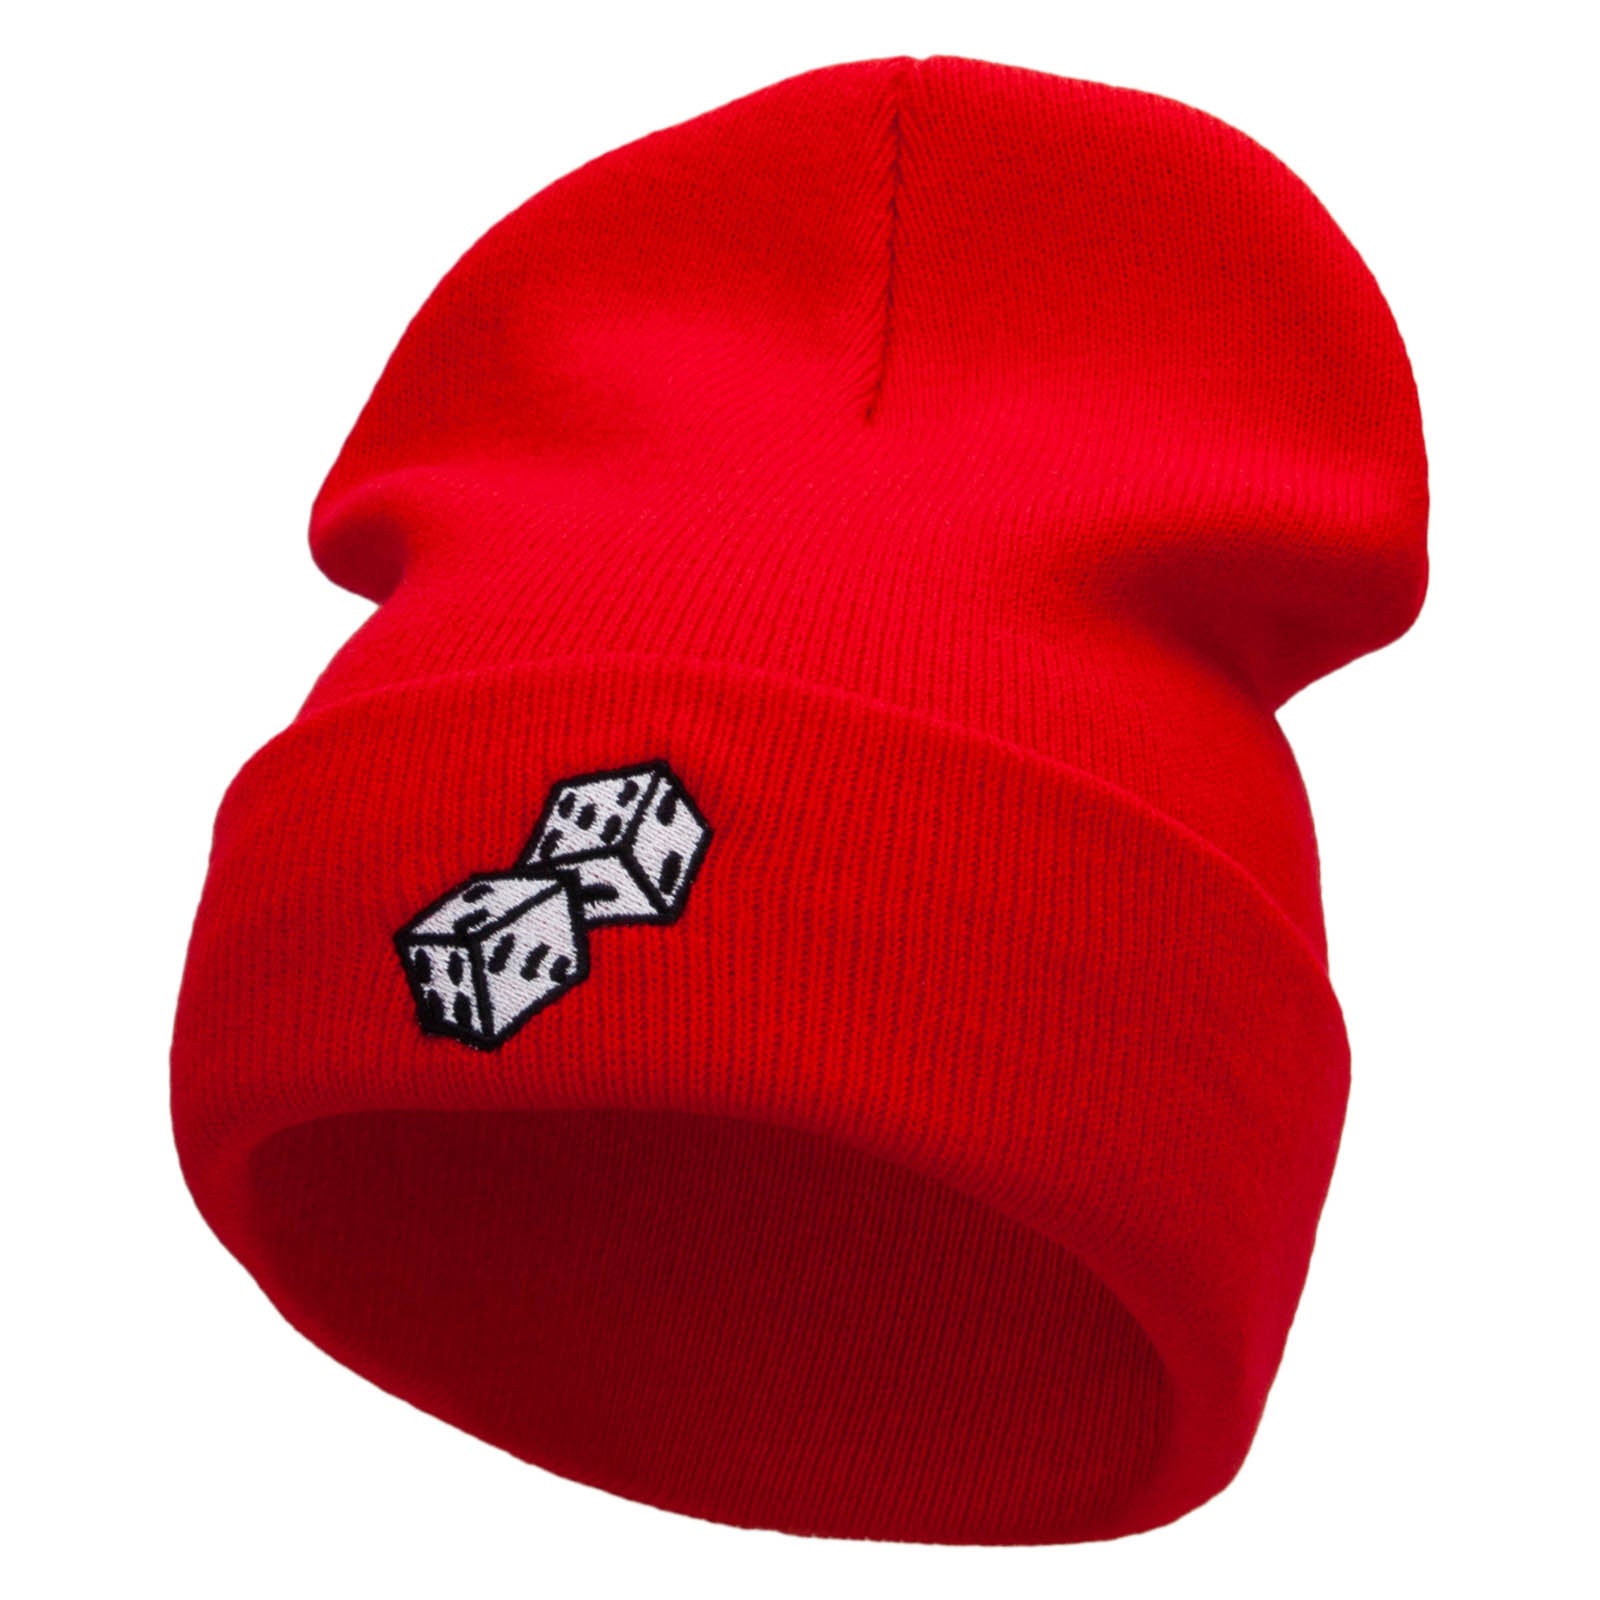 Thrown Dice Embroidered 12 Inch Long Knitted Beanie - Red OSFM